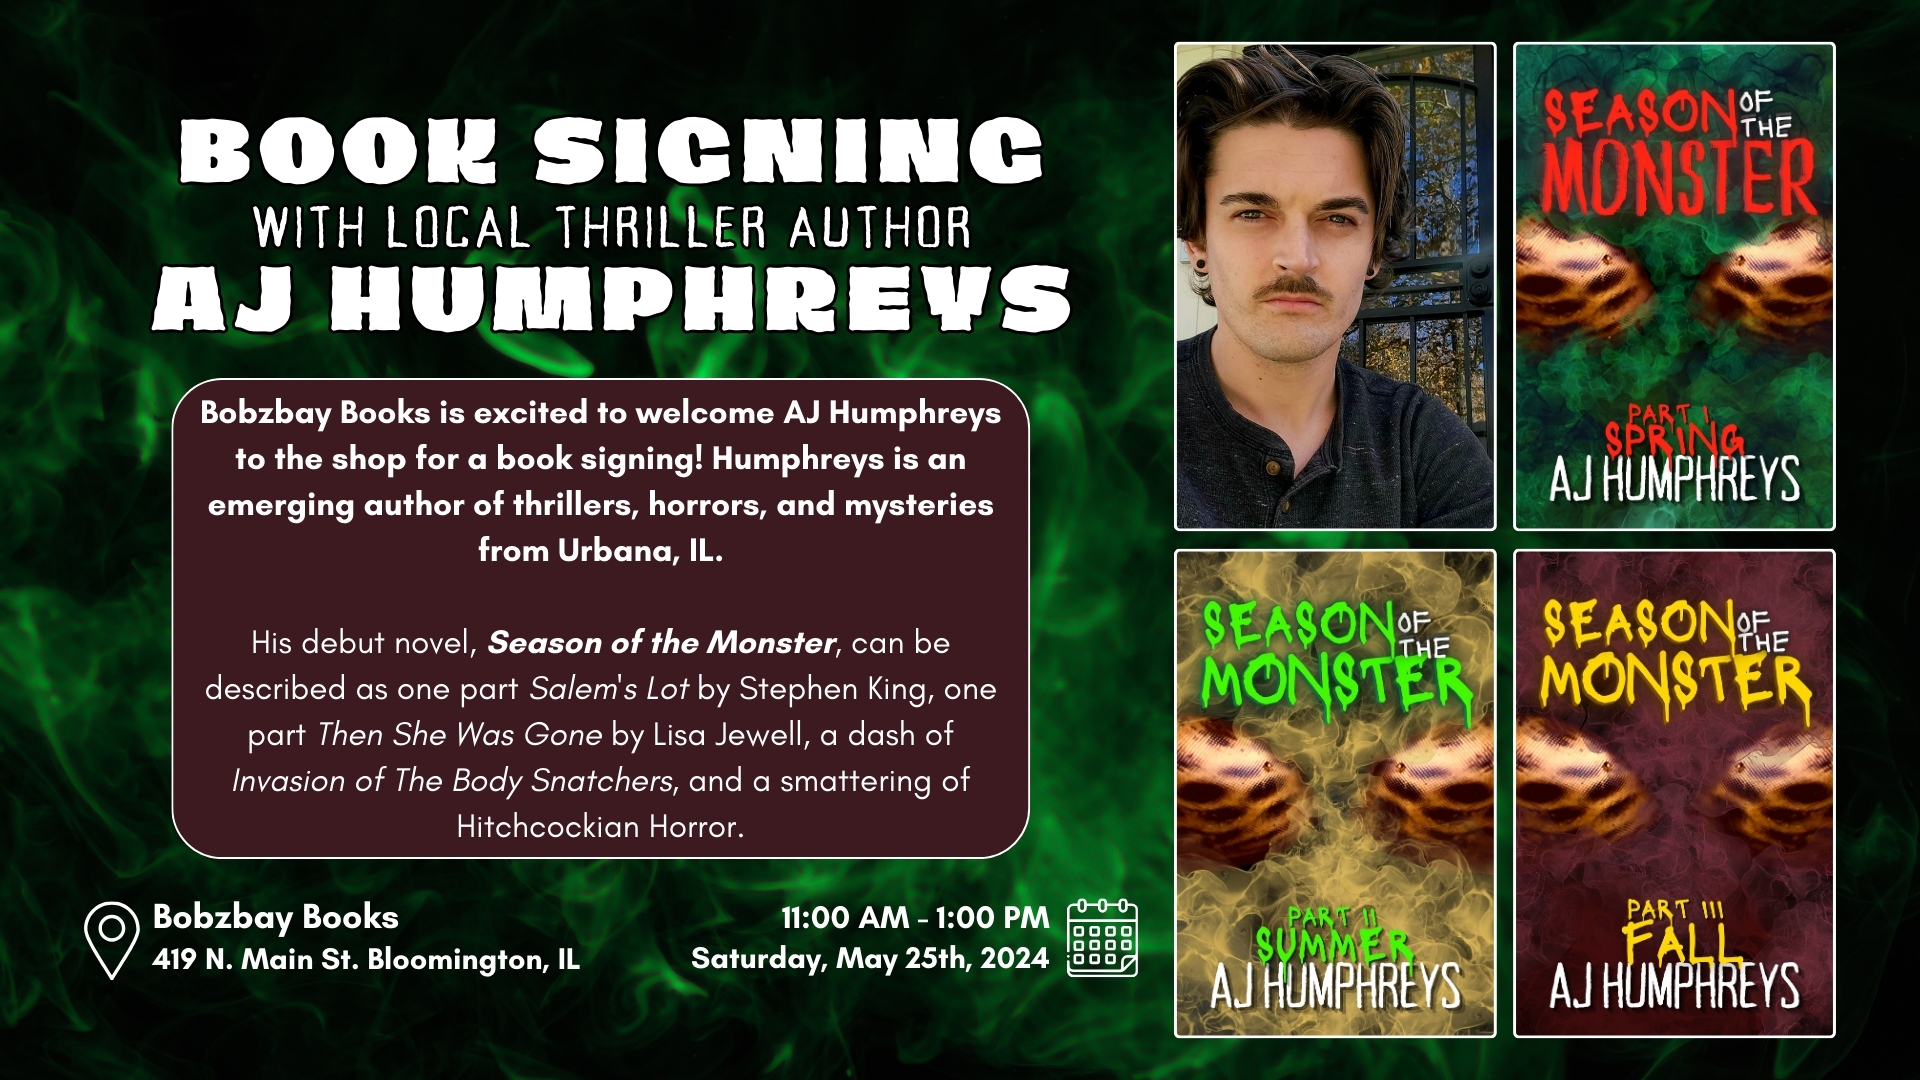 Book Signing with Illinois Horror / Thriller Author AJ Humphreys at Bobzbay Books